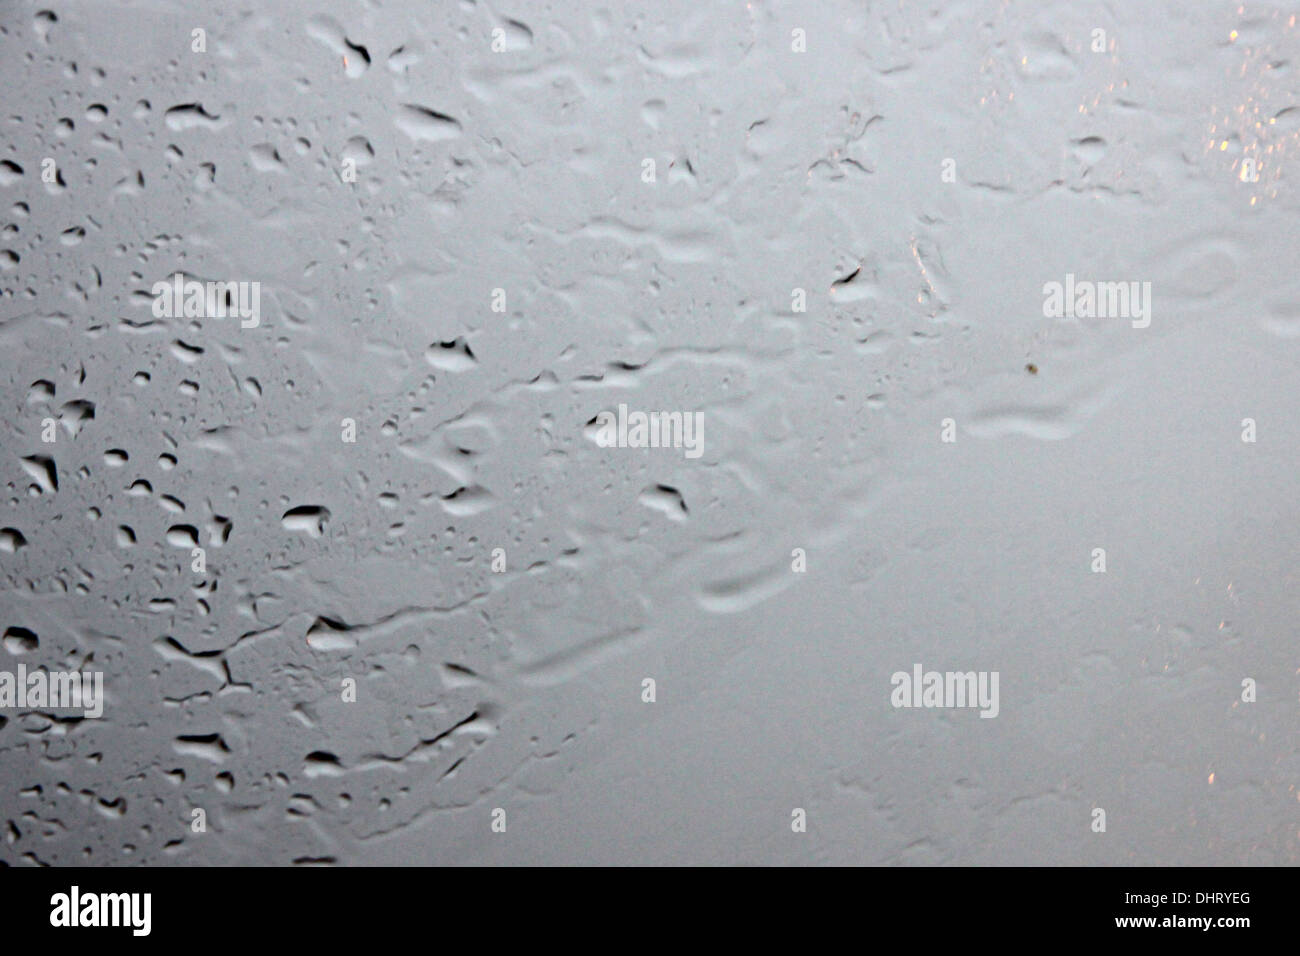 The Picture Rain on the Windshield. Stock Photo